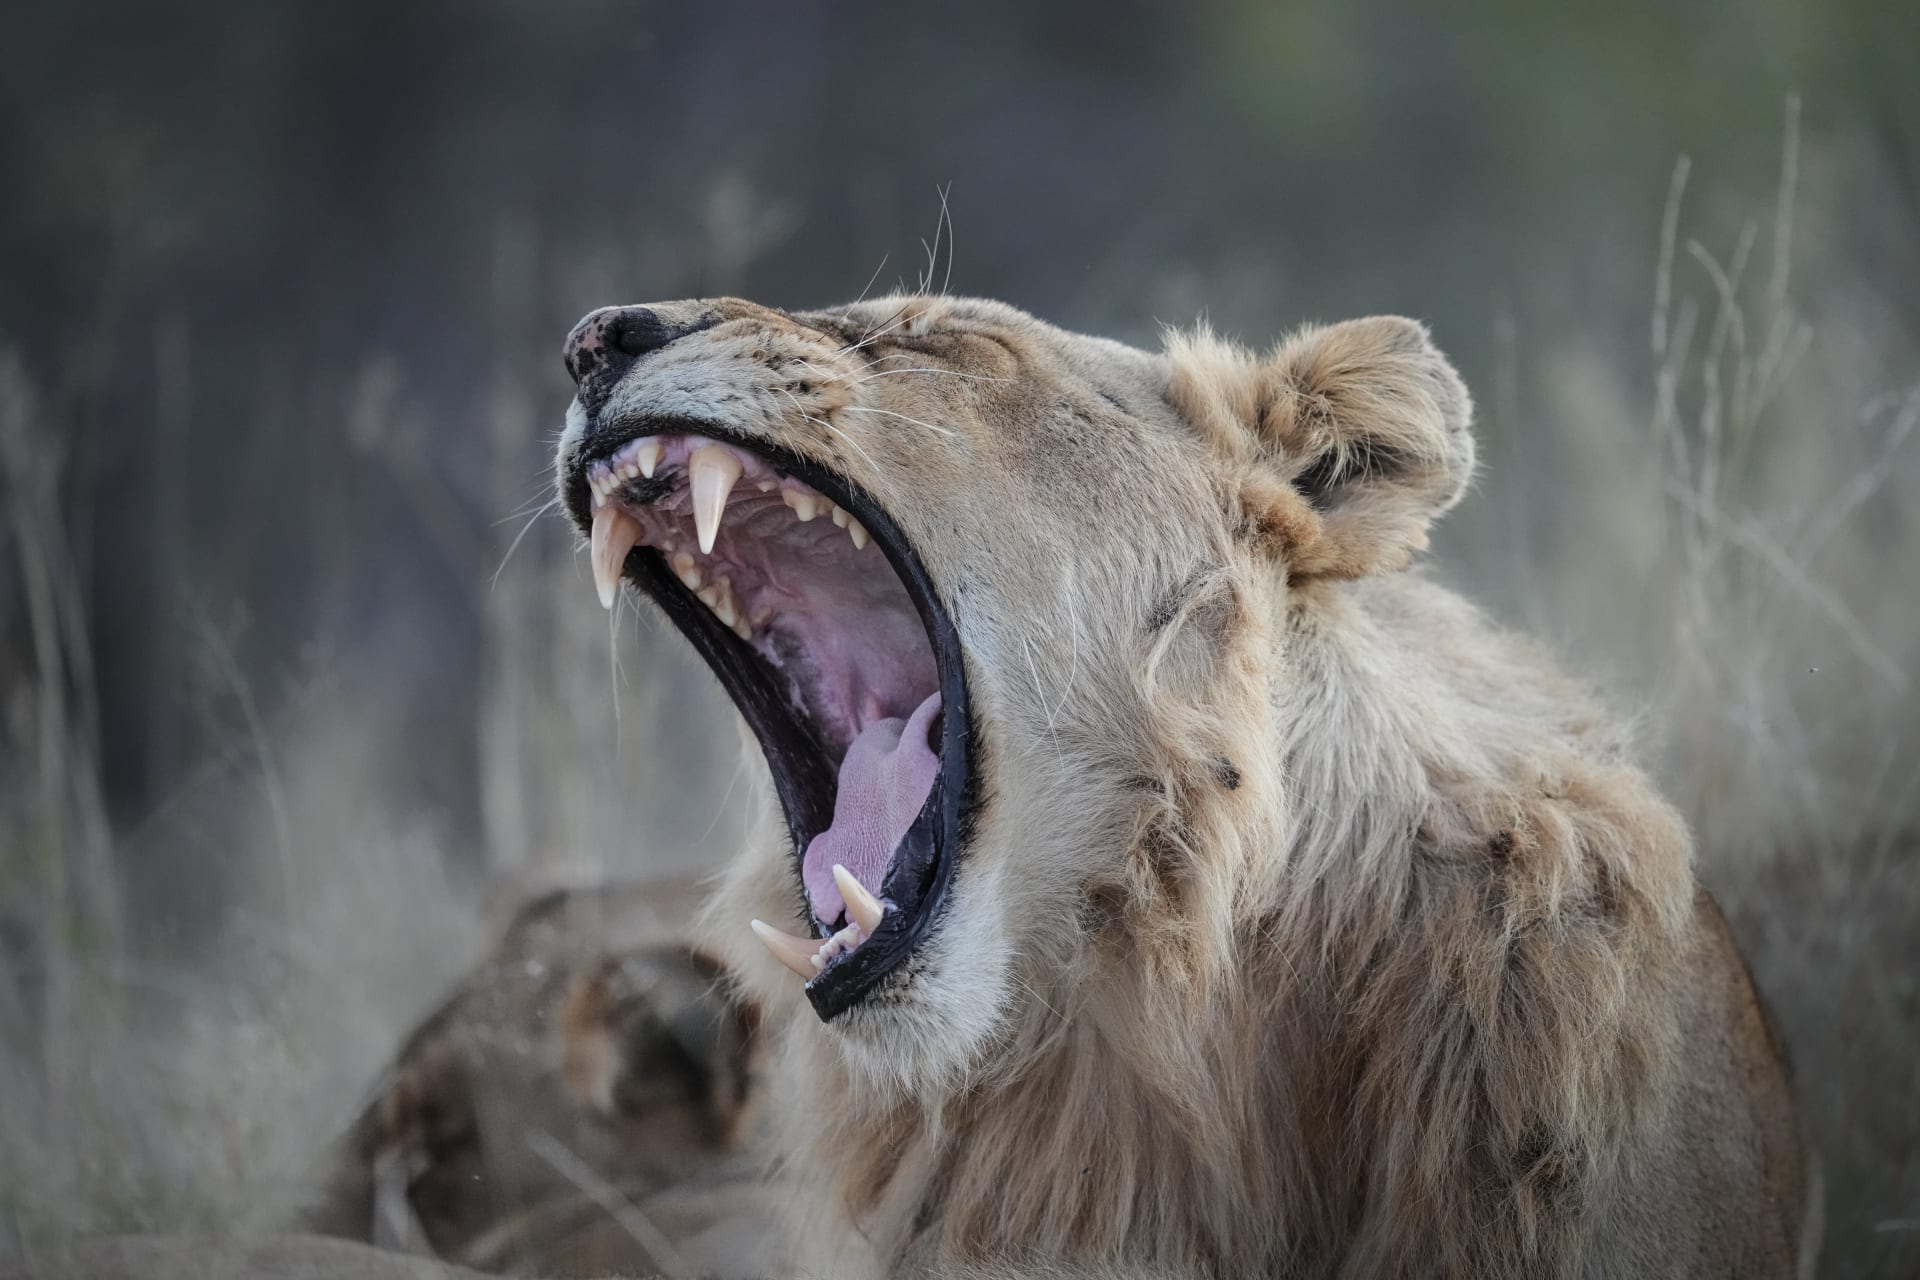 Over 30 million views.. A breathtaking video of a confrontation between a man and a young lion